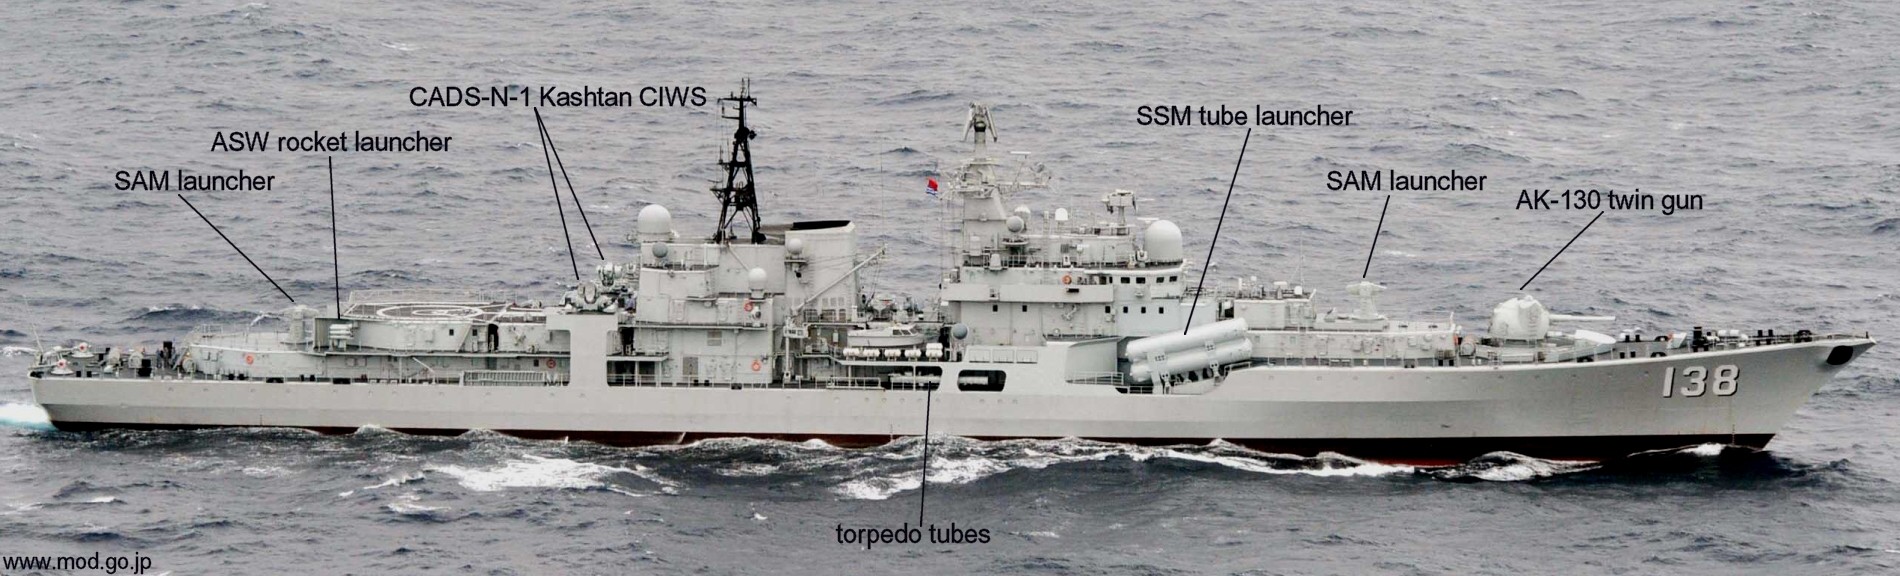 hangzhou class guided missile destroyer ddg project 956-em sovremenny china people's liberation army navy plan 02 sam ssm gun ciws